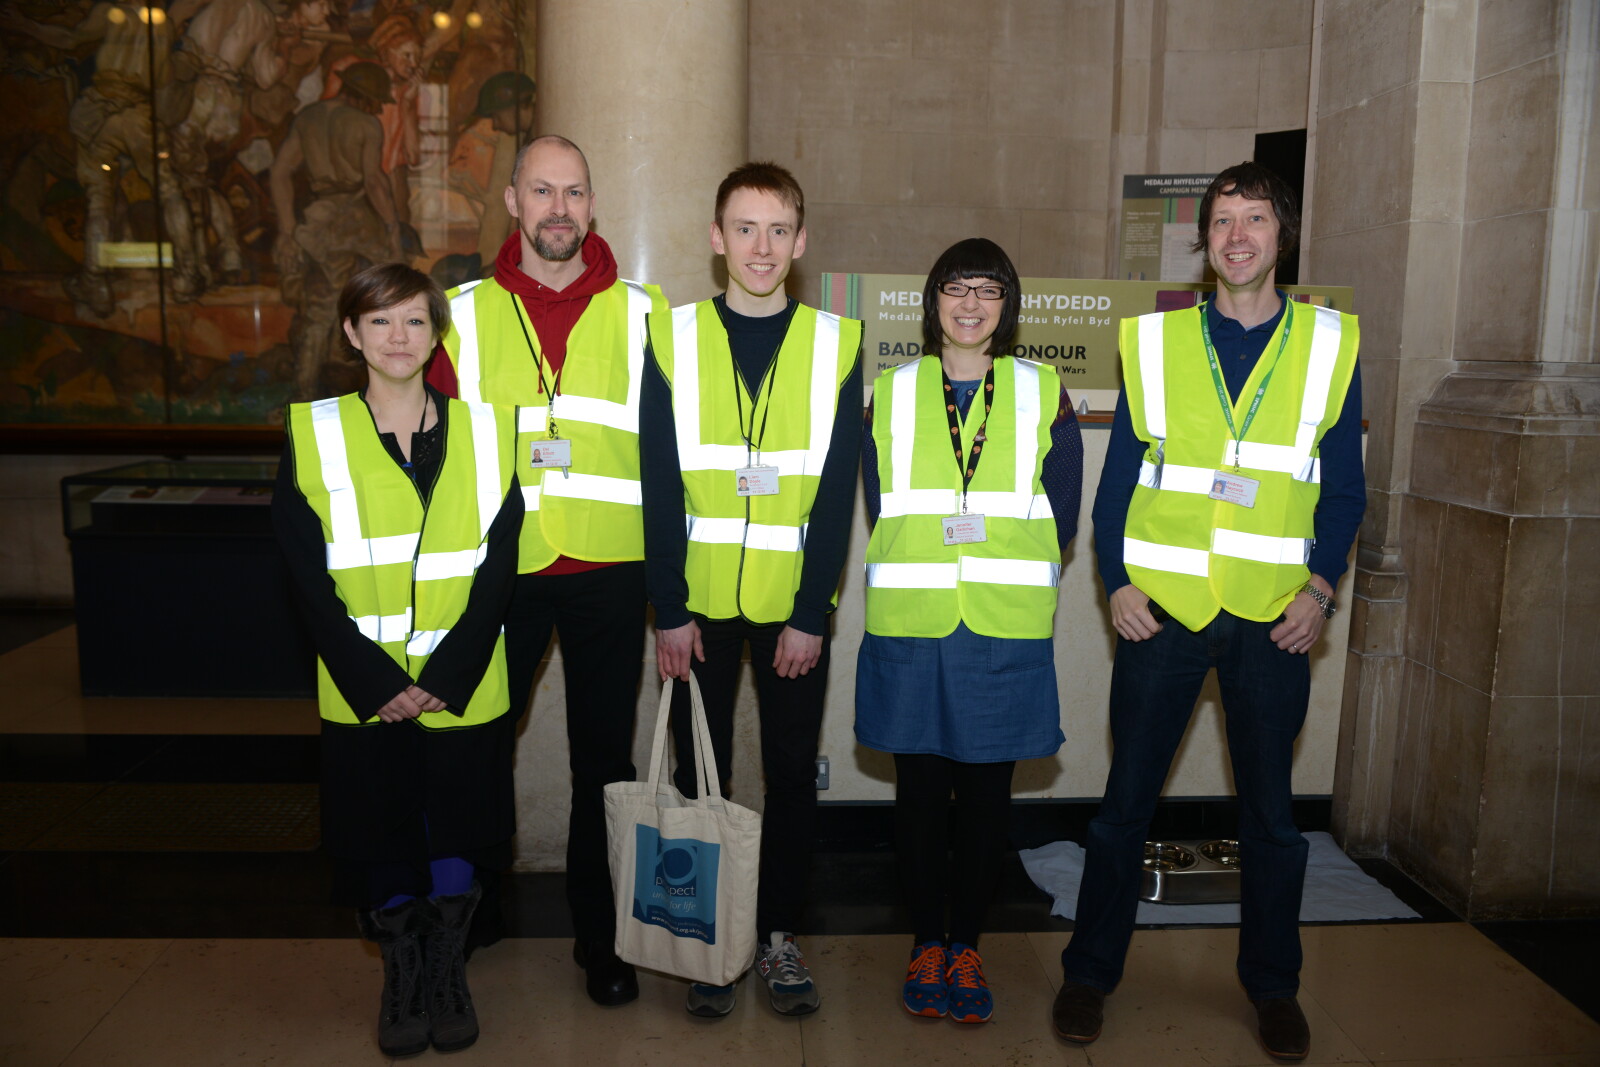 Photograph of museum staff who helped guide visitors with visual impairments